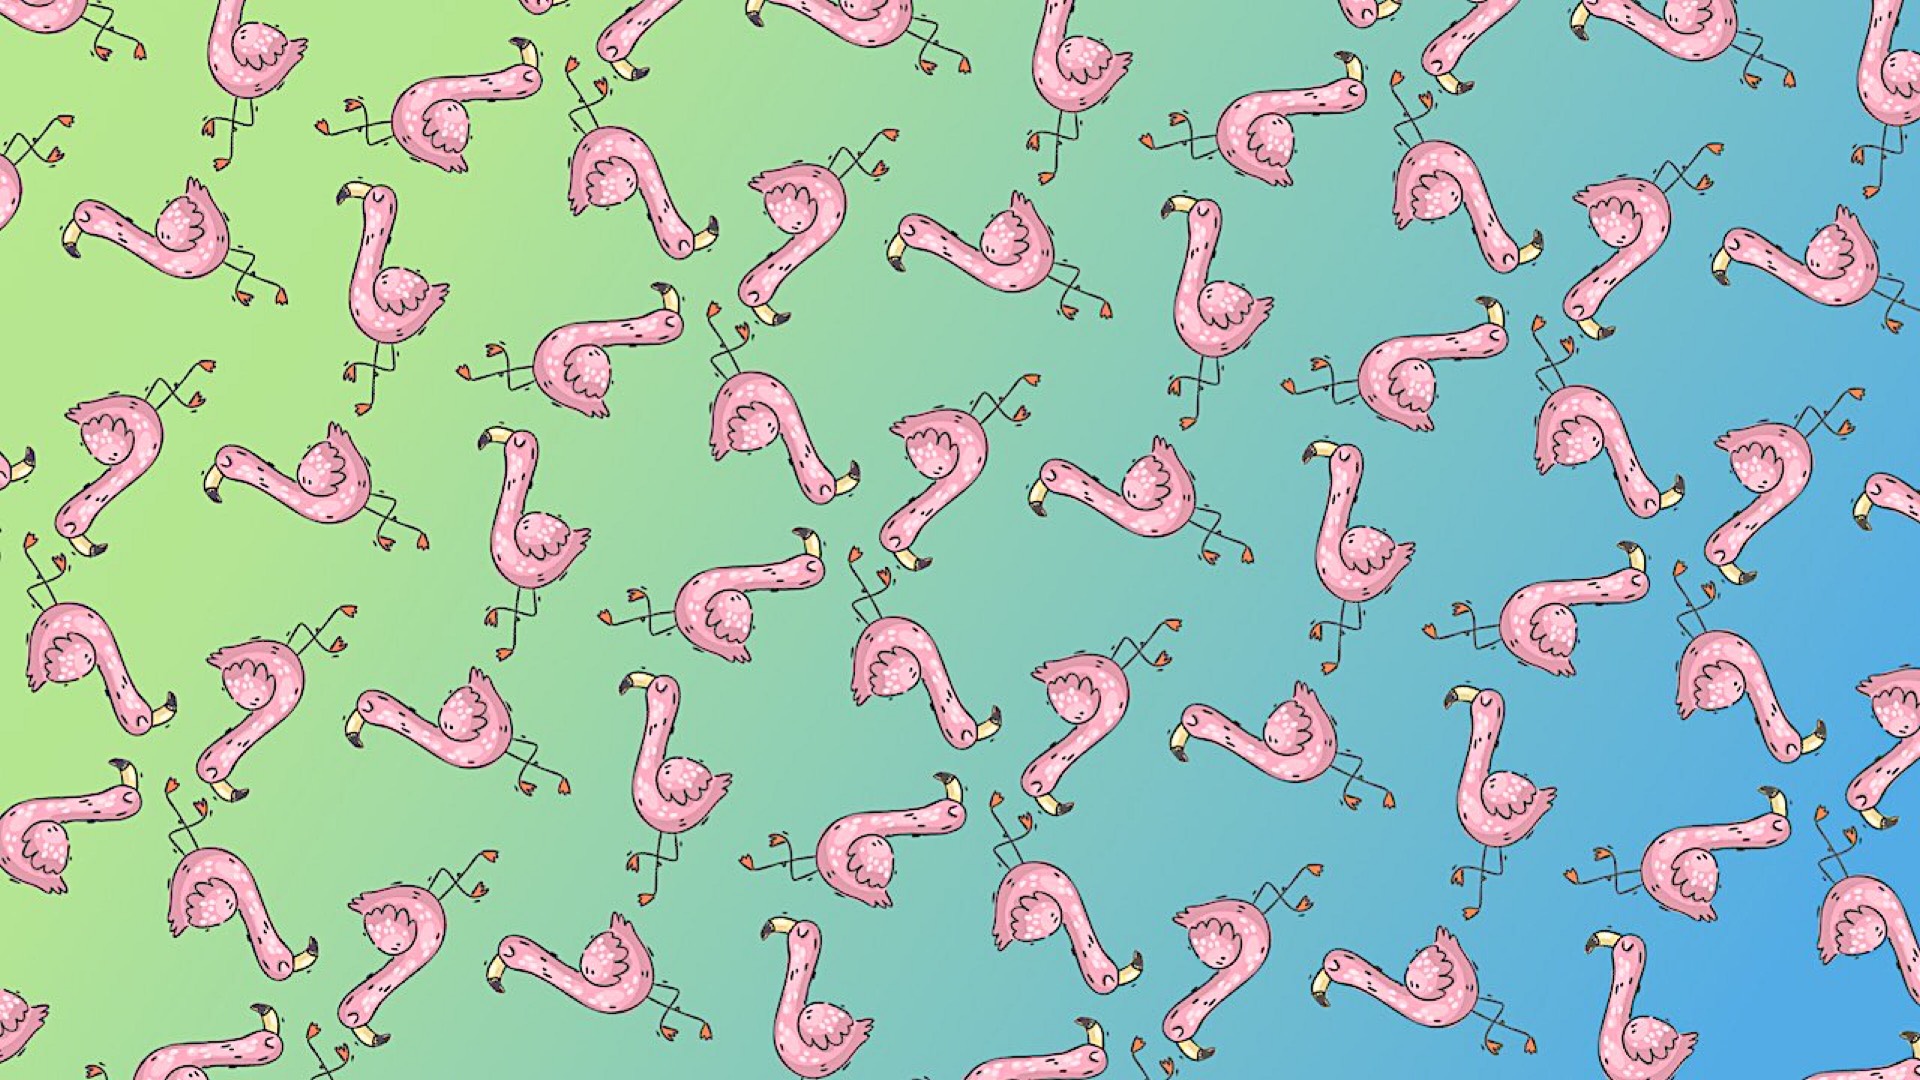 A Pattern Of Pink Worms On A Green And Blue Background Zoom Backgrounds Template